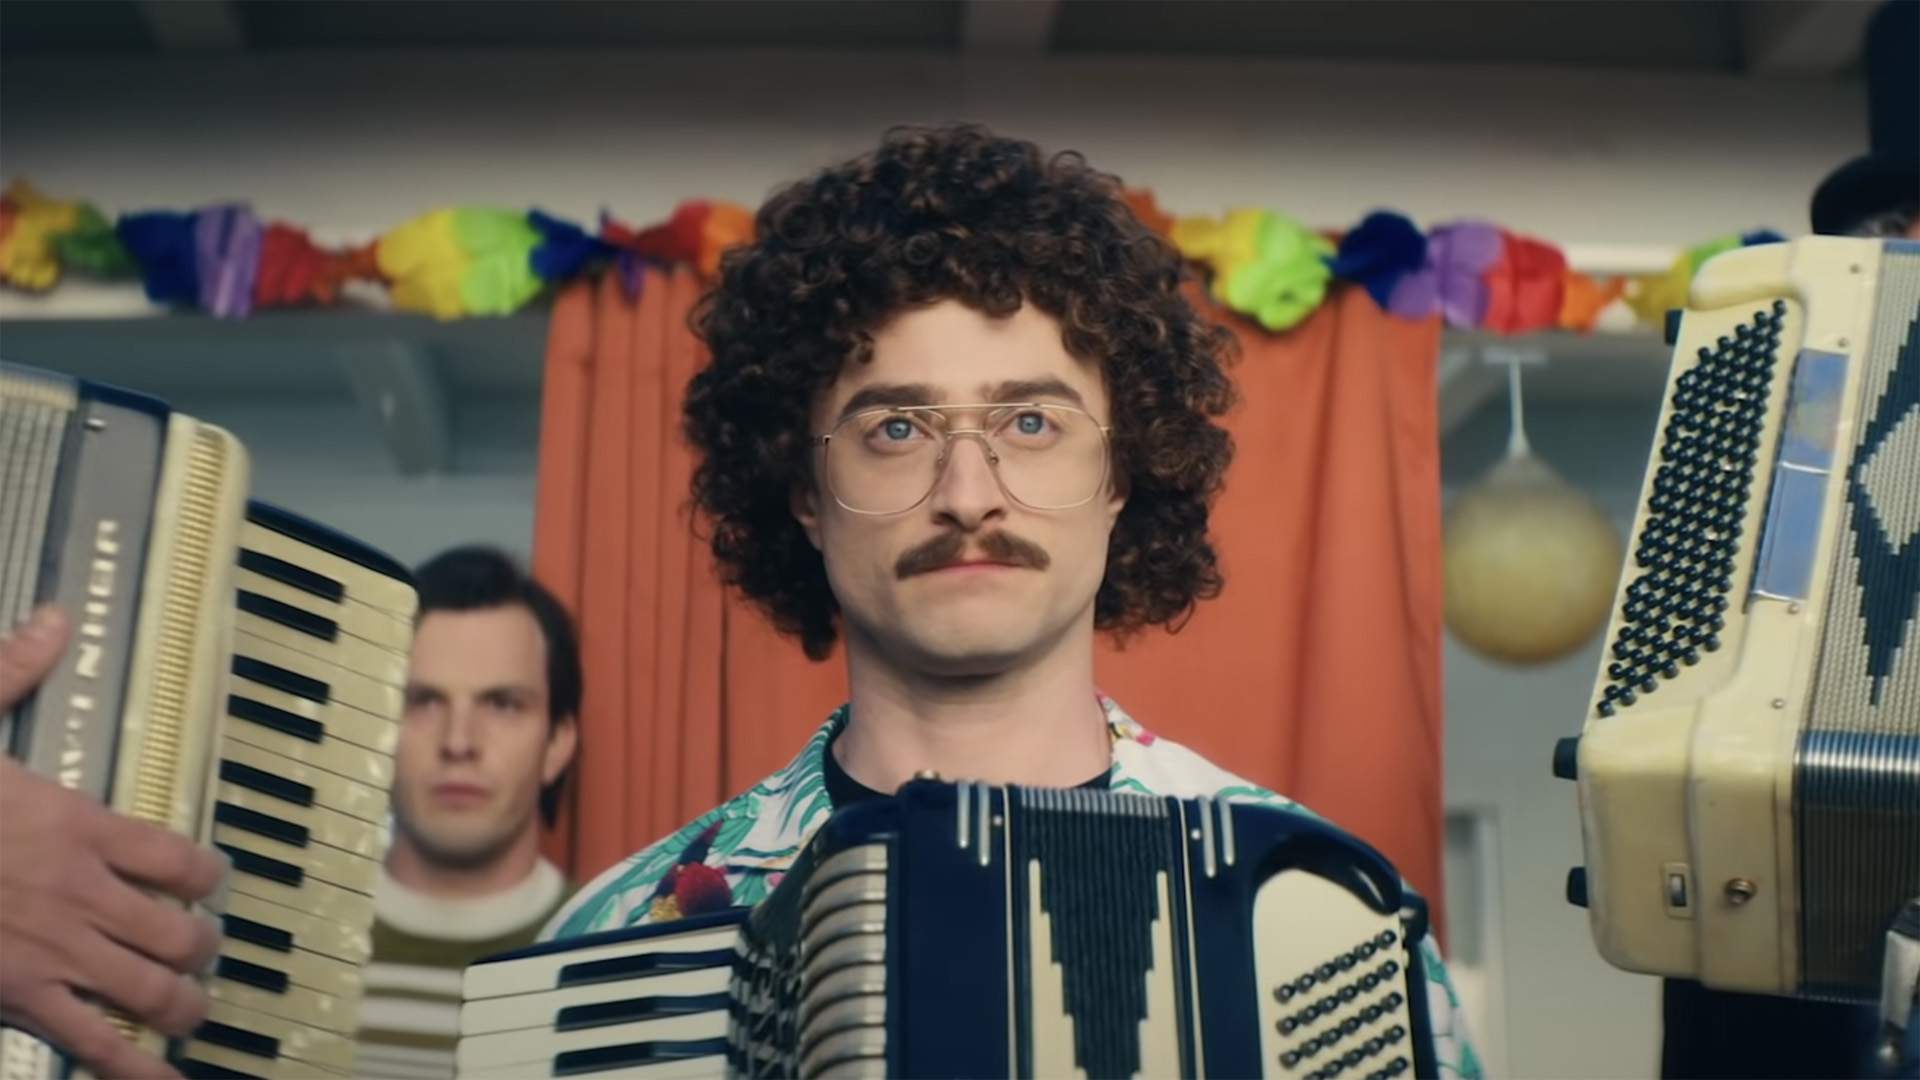 Daniel Radcliffe Transforms Into Al Yankovic in the First Teaser Trailer for Music Biopic 'Weird'